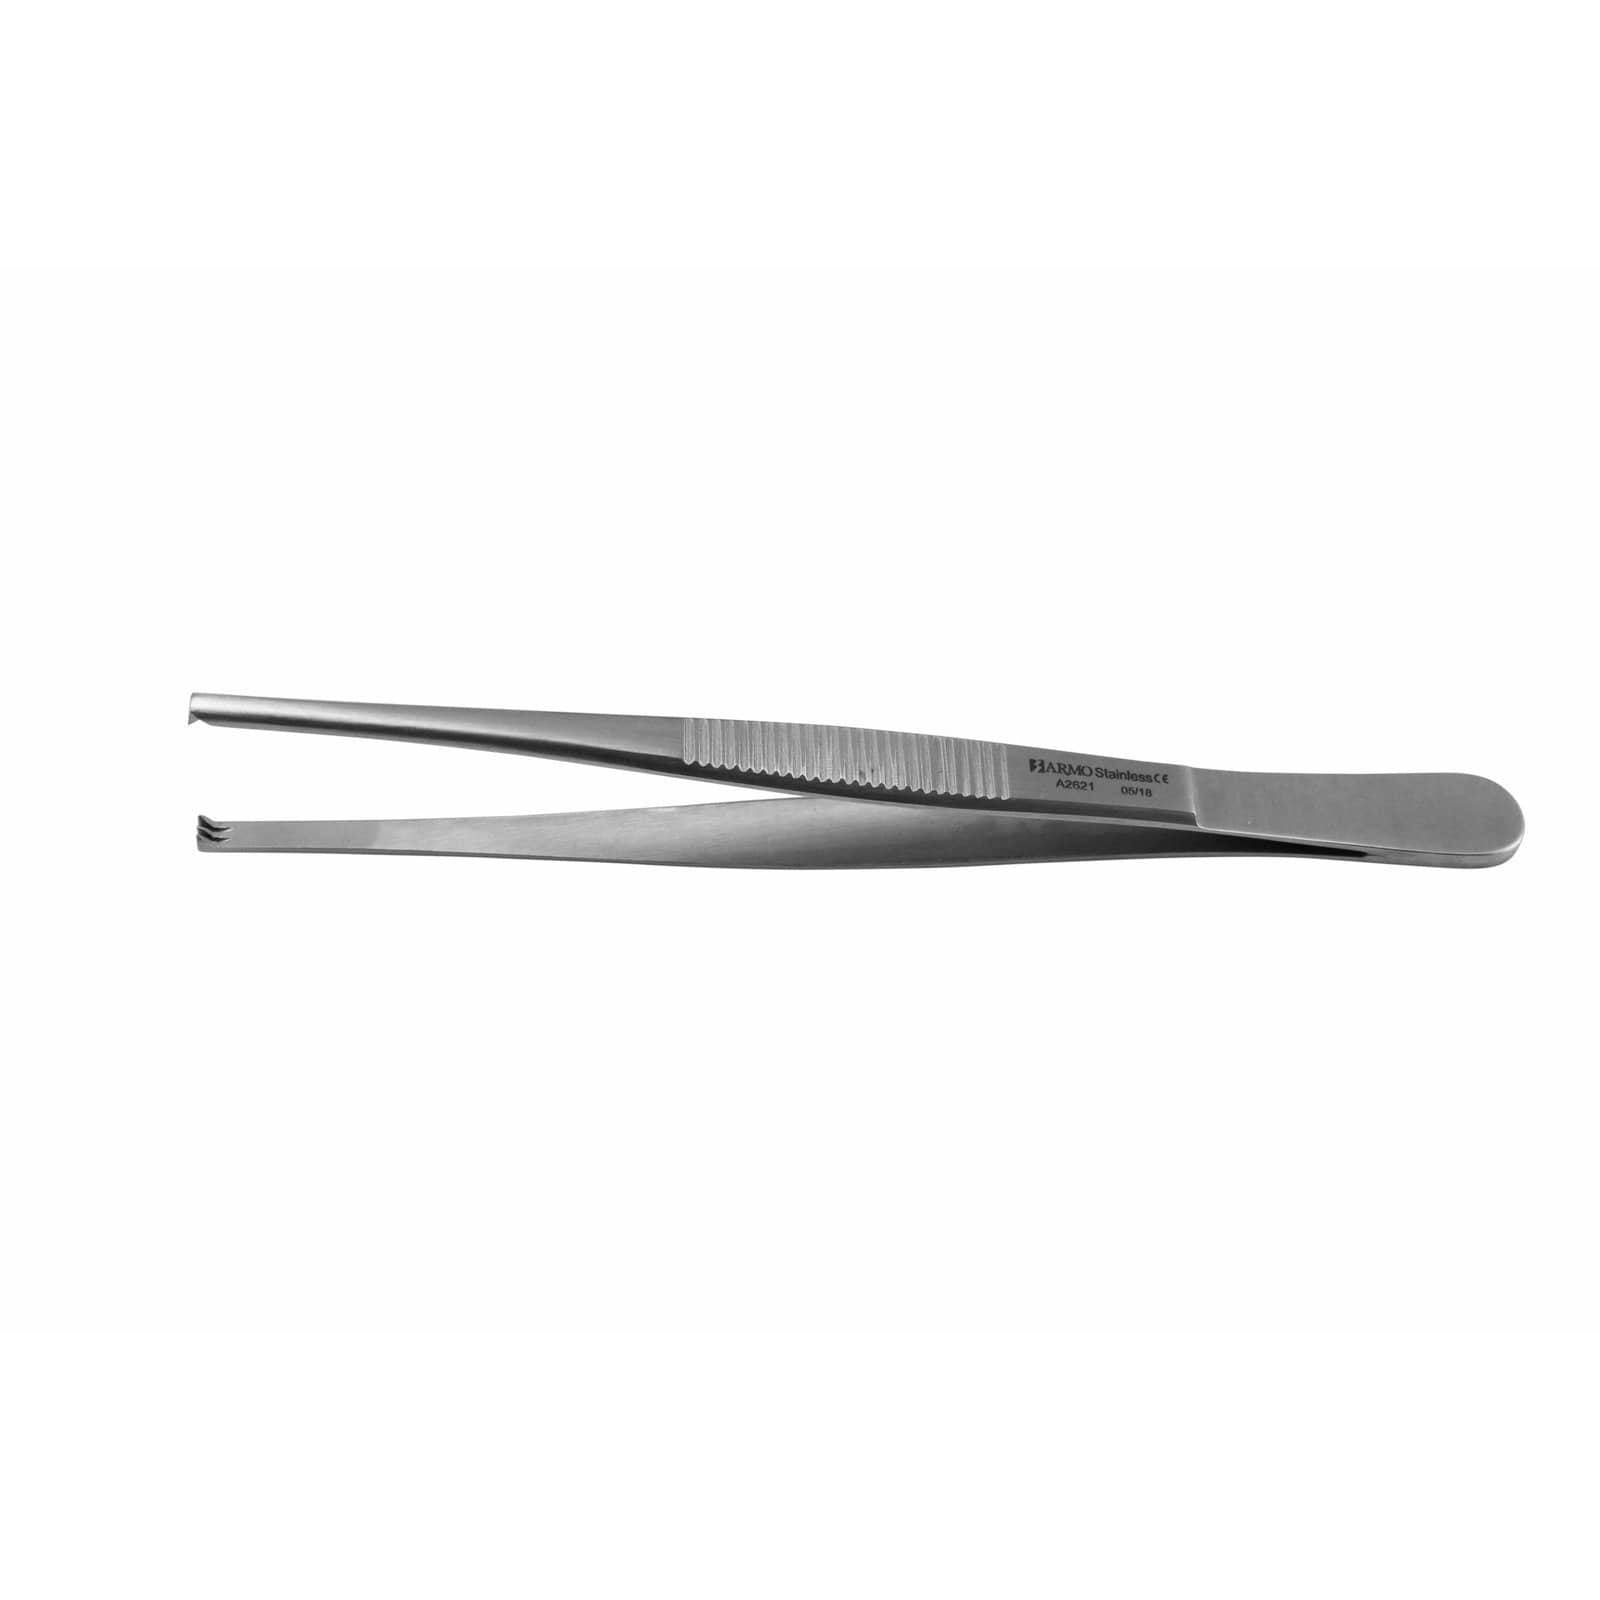 Armo Surgical Instruments 13cm / 2x3 Teeth Armo Tissue Forcep